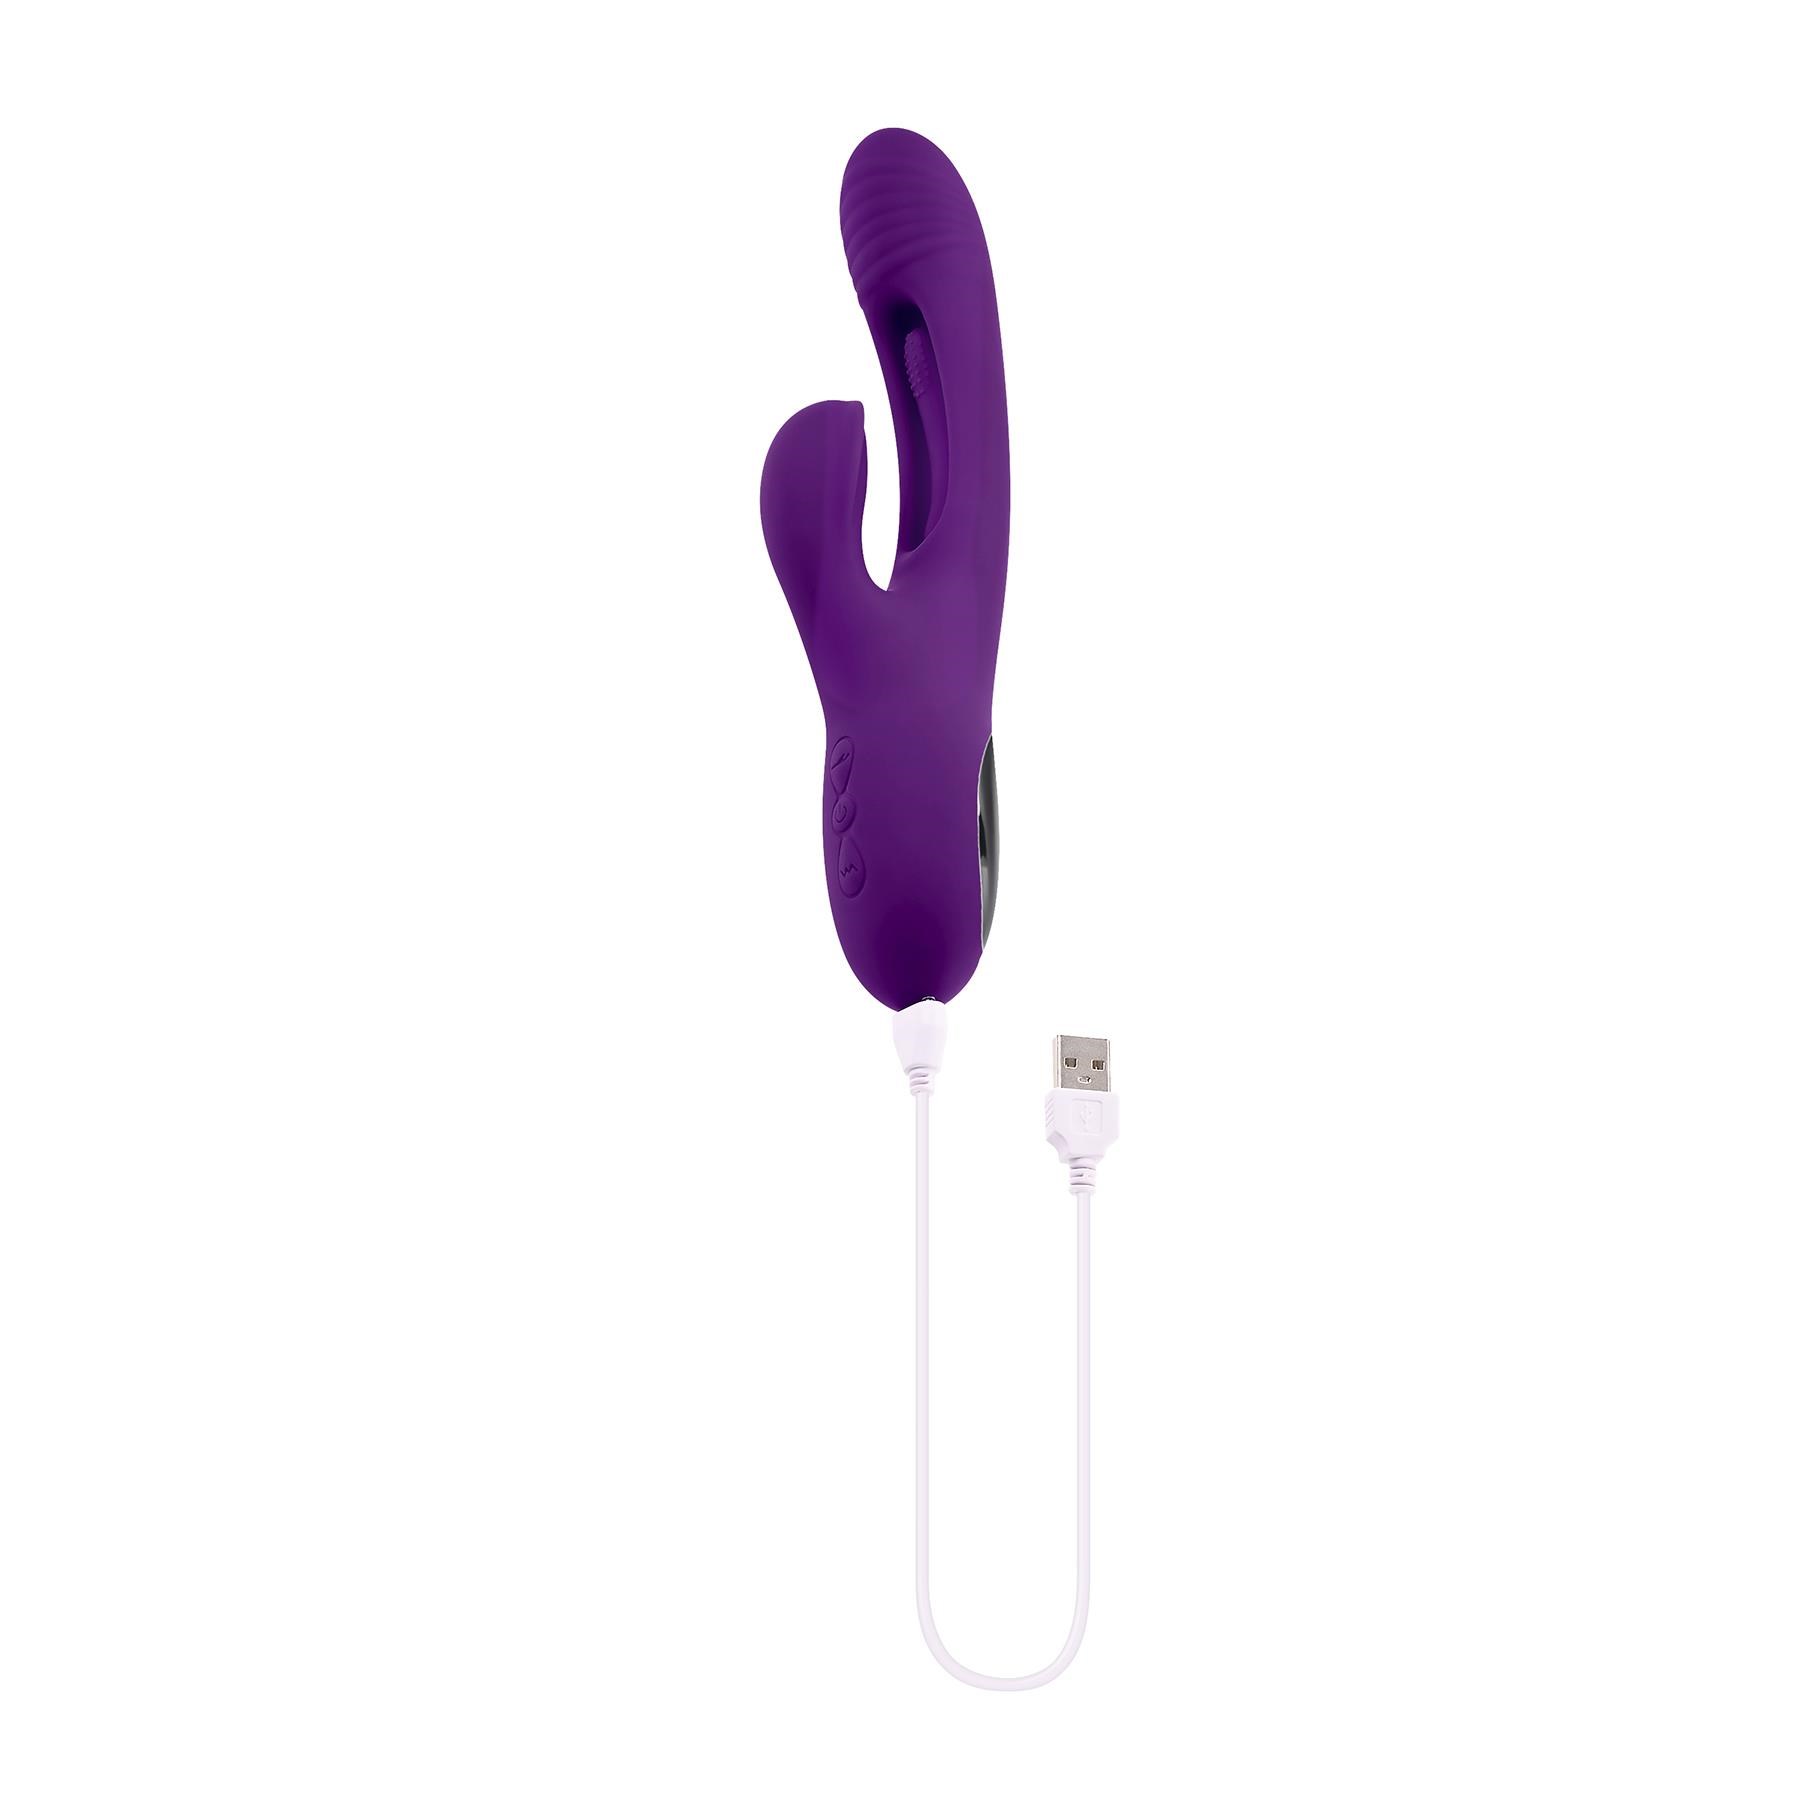 Playboy Pleasure The Thrill Rabbit Vibrator - Product Shot - With Charging Cable